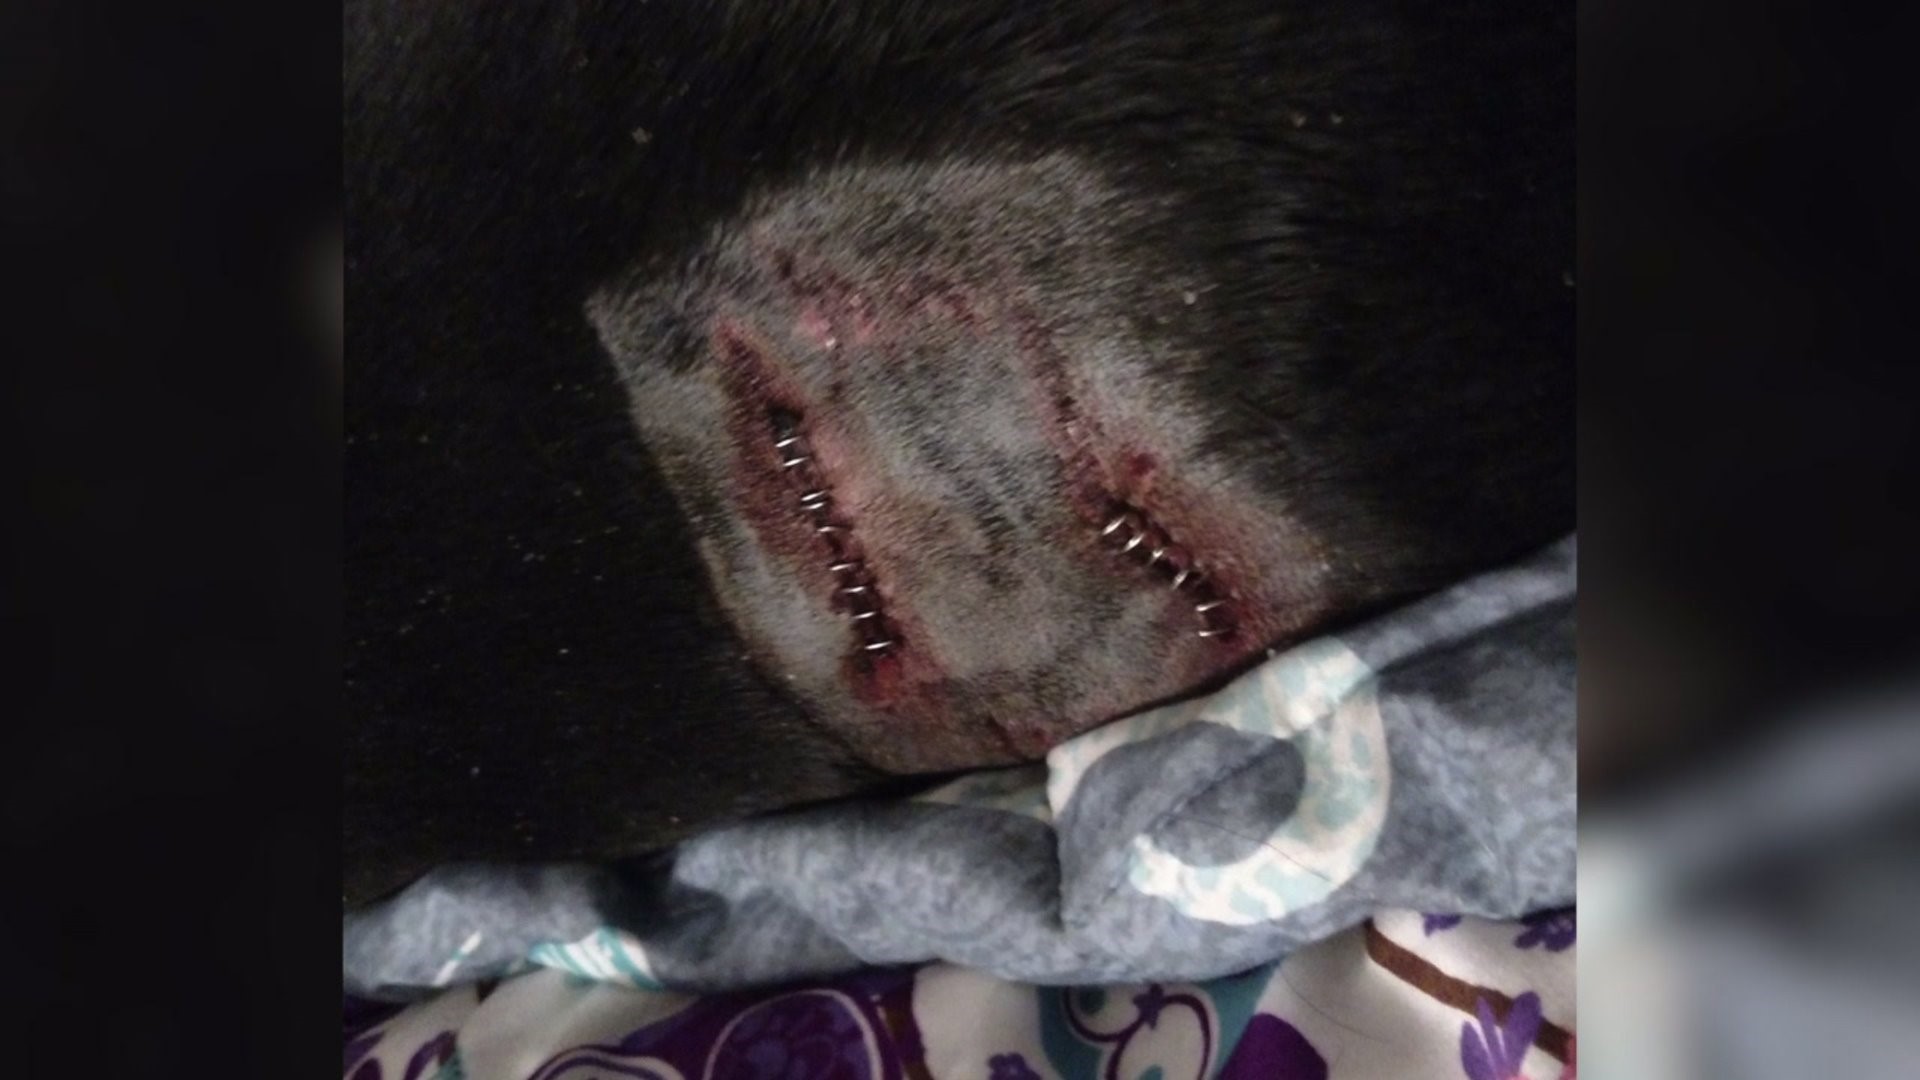 Dog attacked by pack of 3 loose dogs in Rock Island